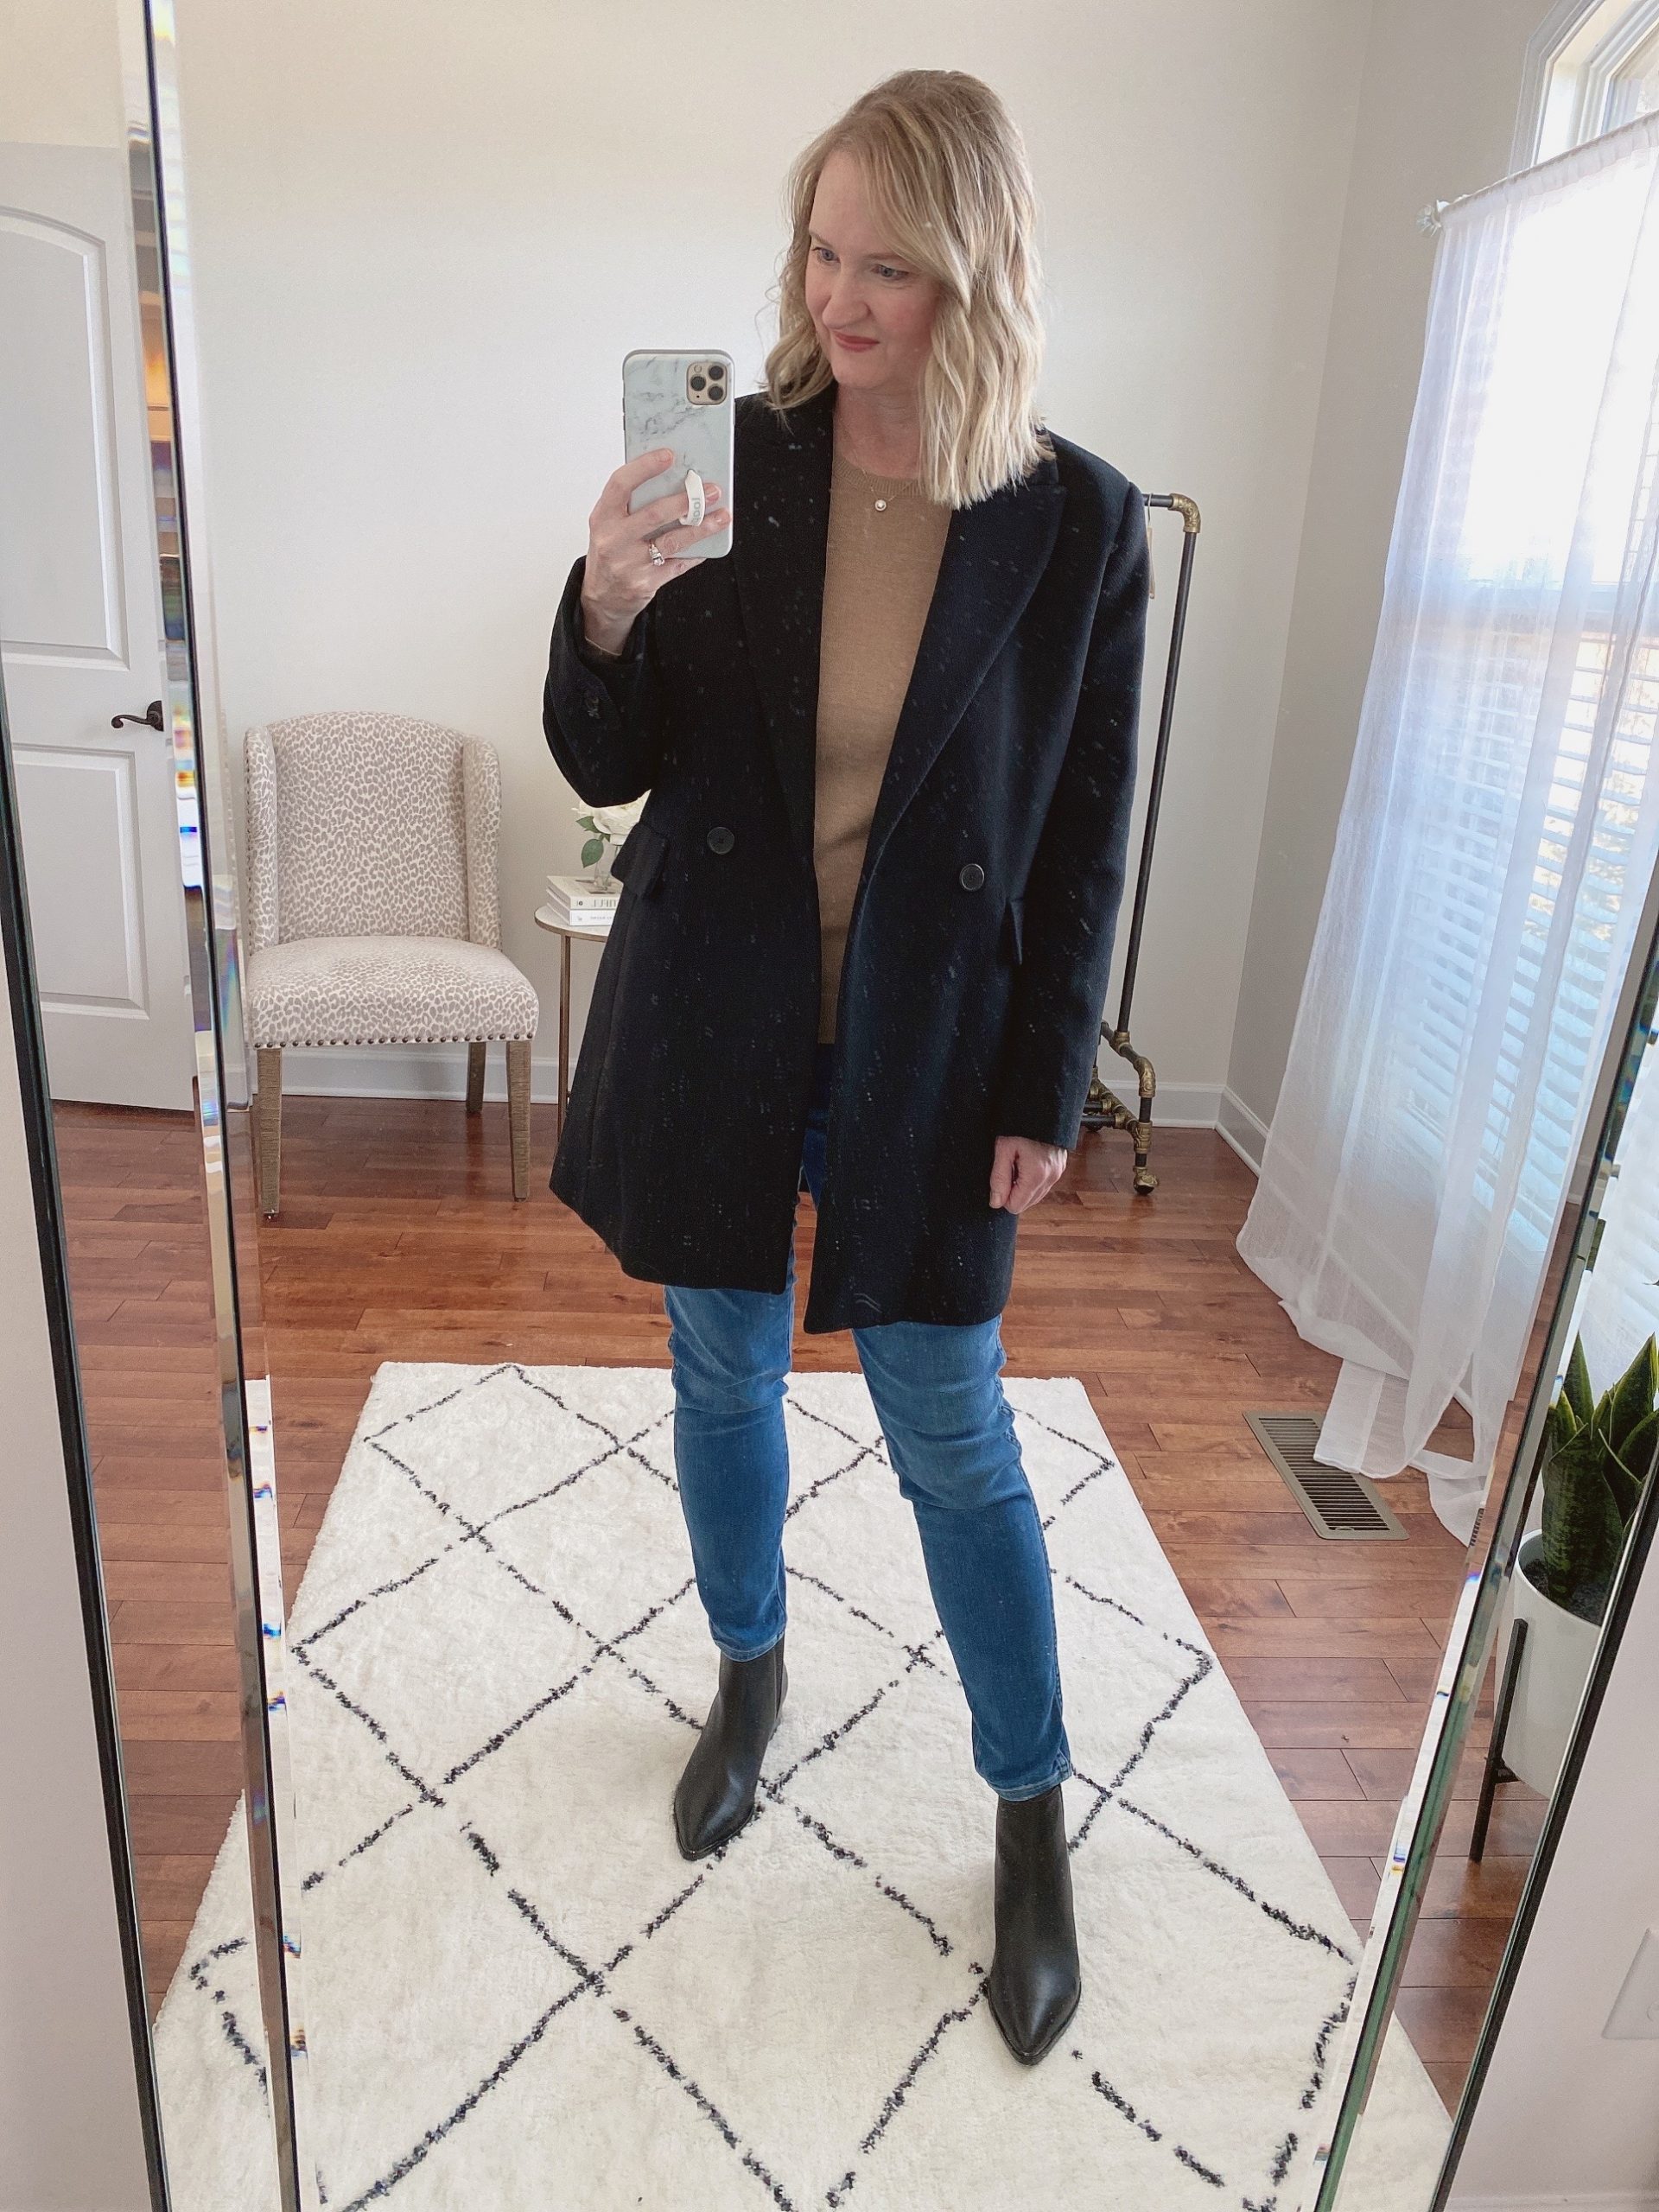 Winter Coat Try-On Session and Black Friday Sales Codes - Classy Yet Trendy